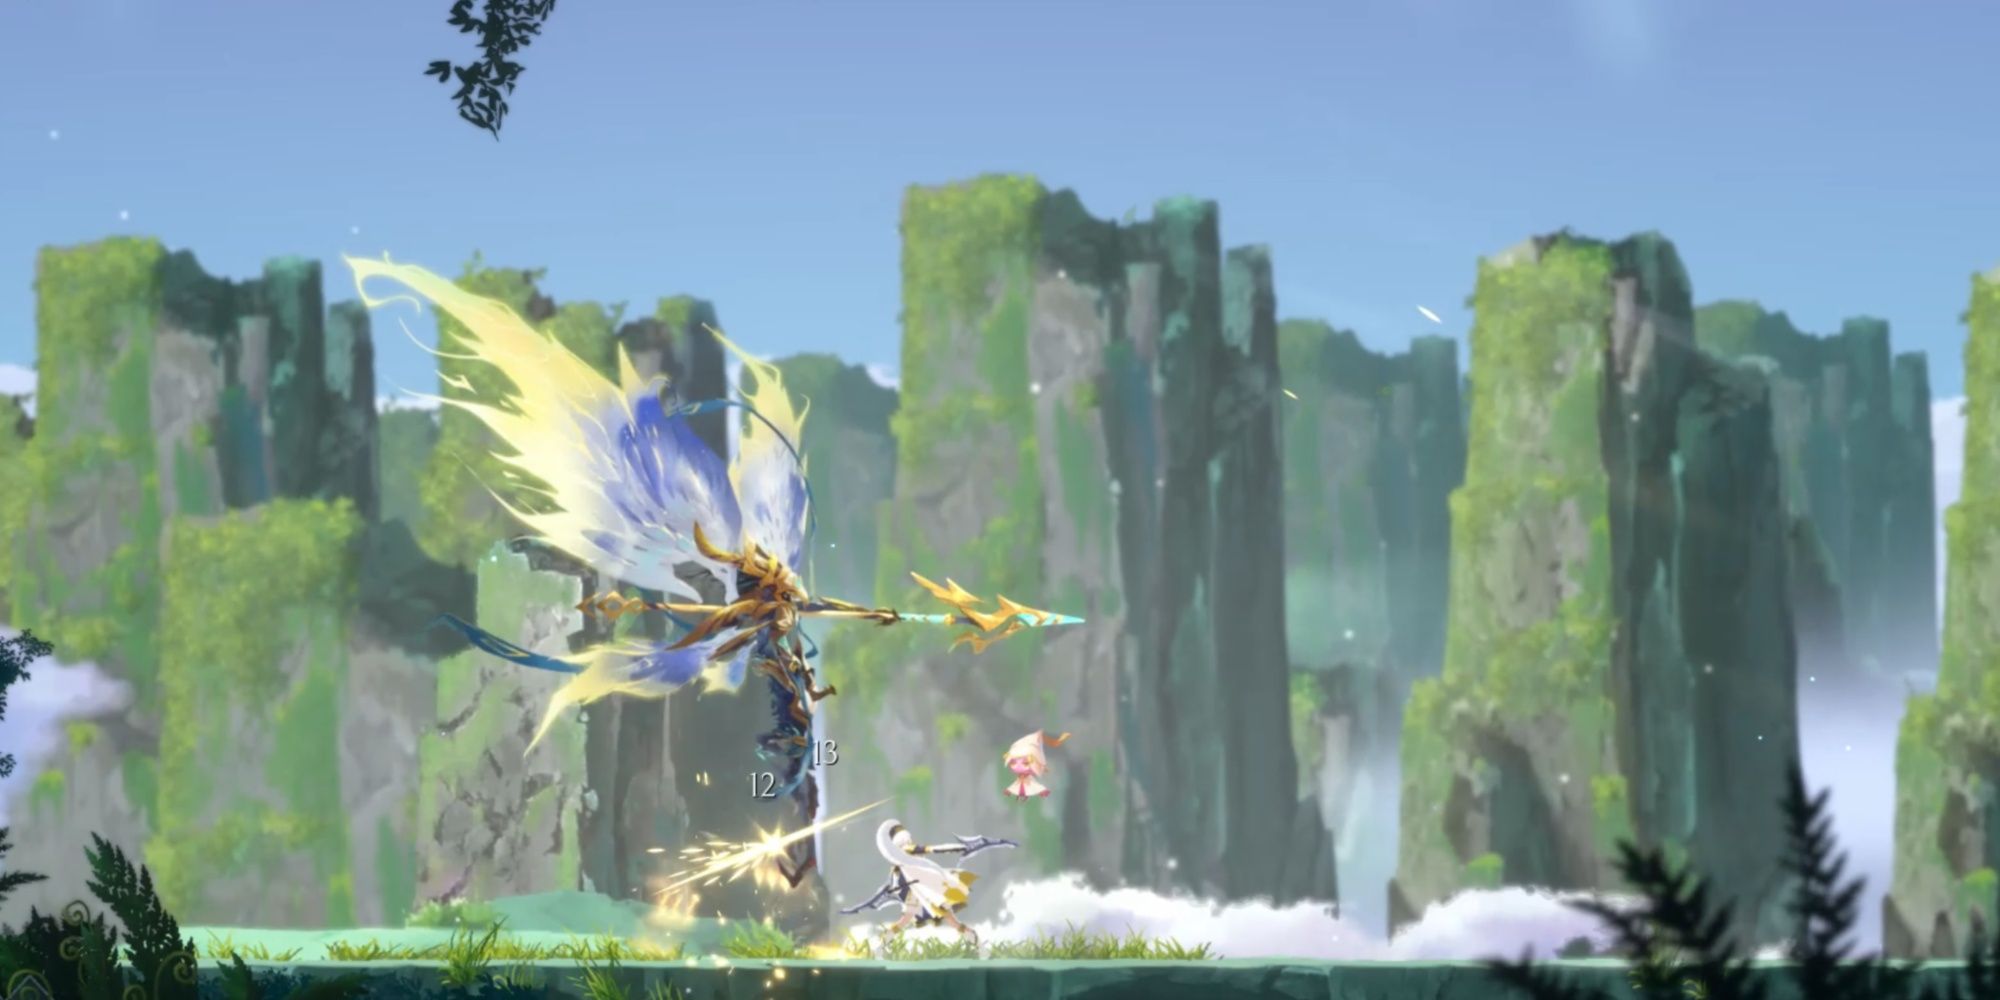 Renee attacking Loss, the Galefeather with her Dualblades in Afterimage